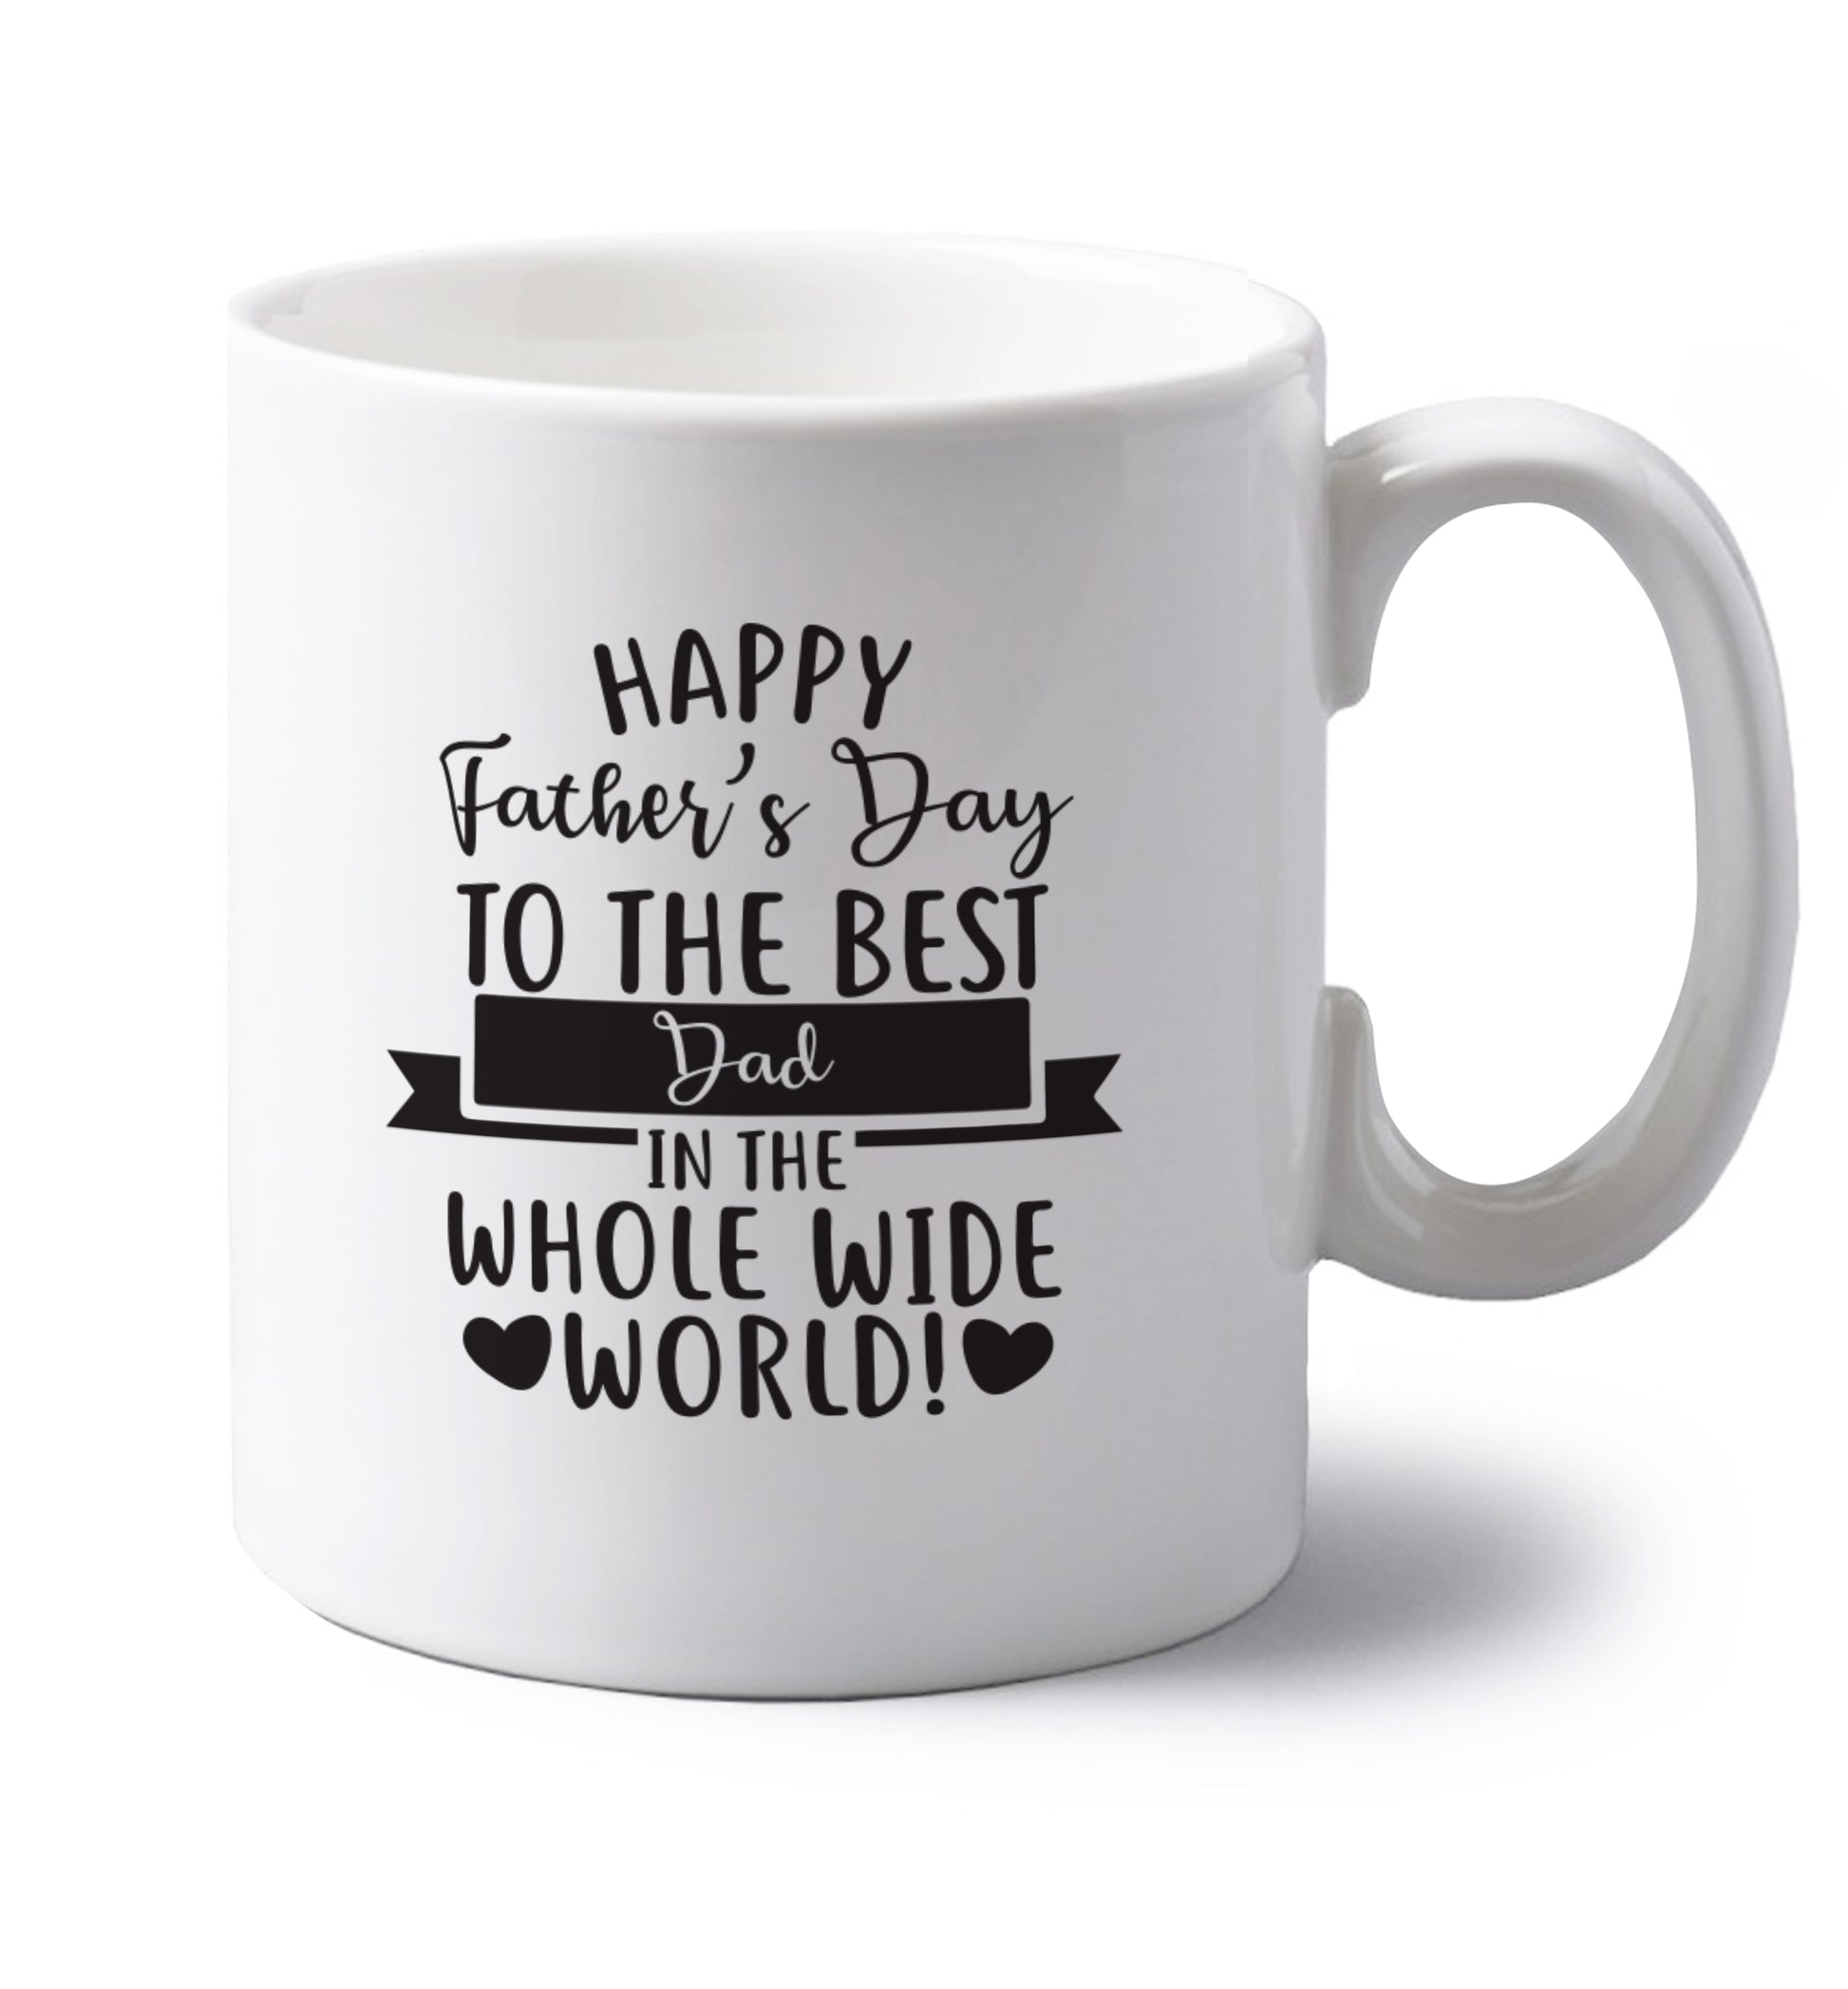 Happy Father's Day to the best father in the world! left handed white ceramic mug 